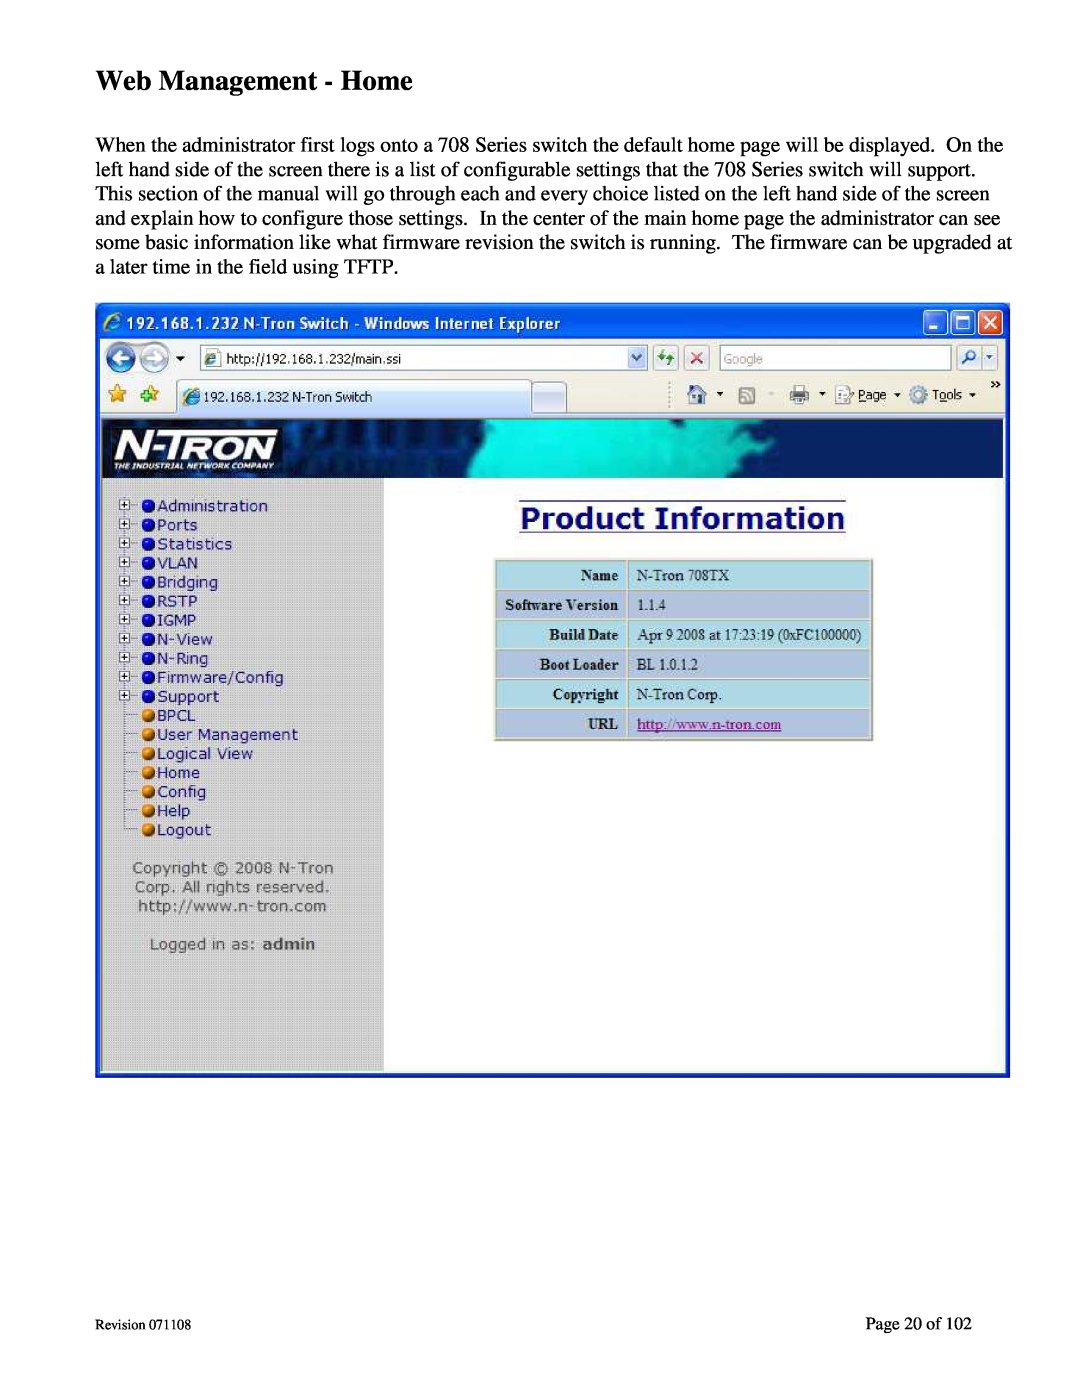 N-Tron 708M12 user manual Web Management - Home, Page 20 of 